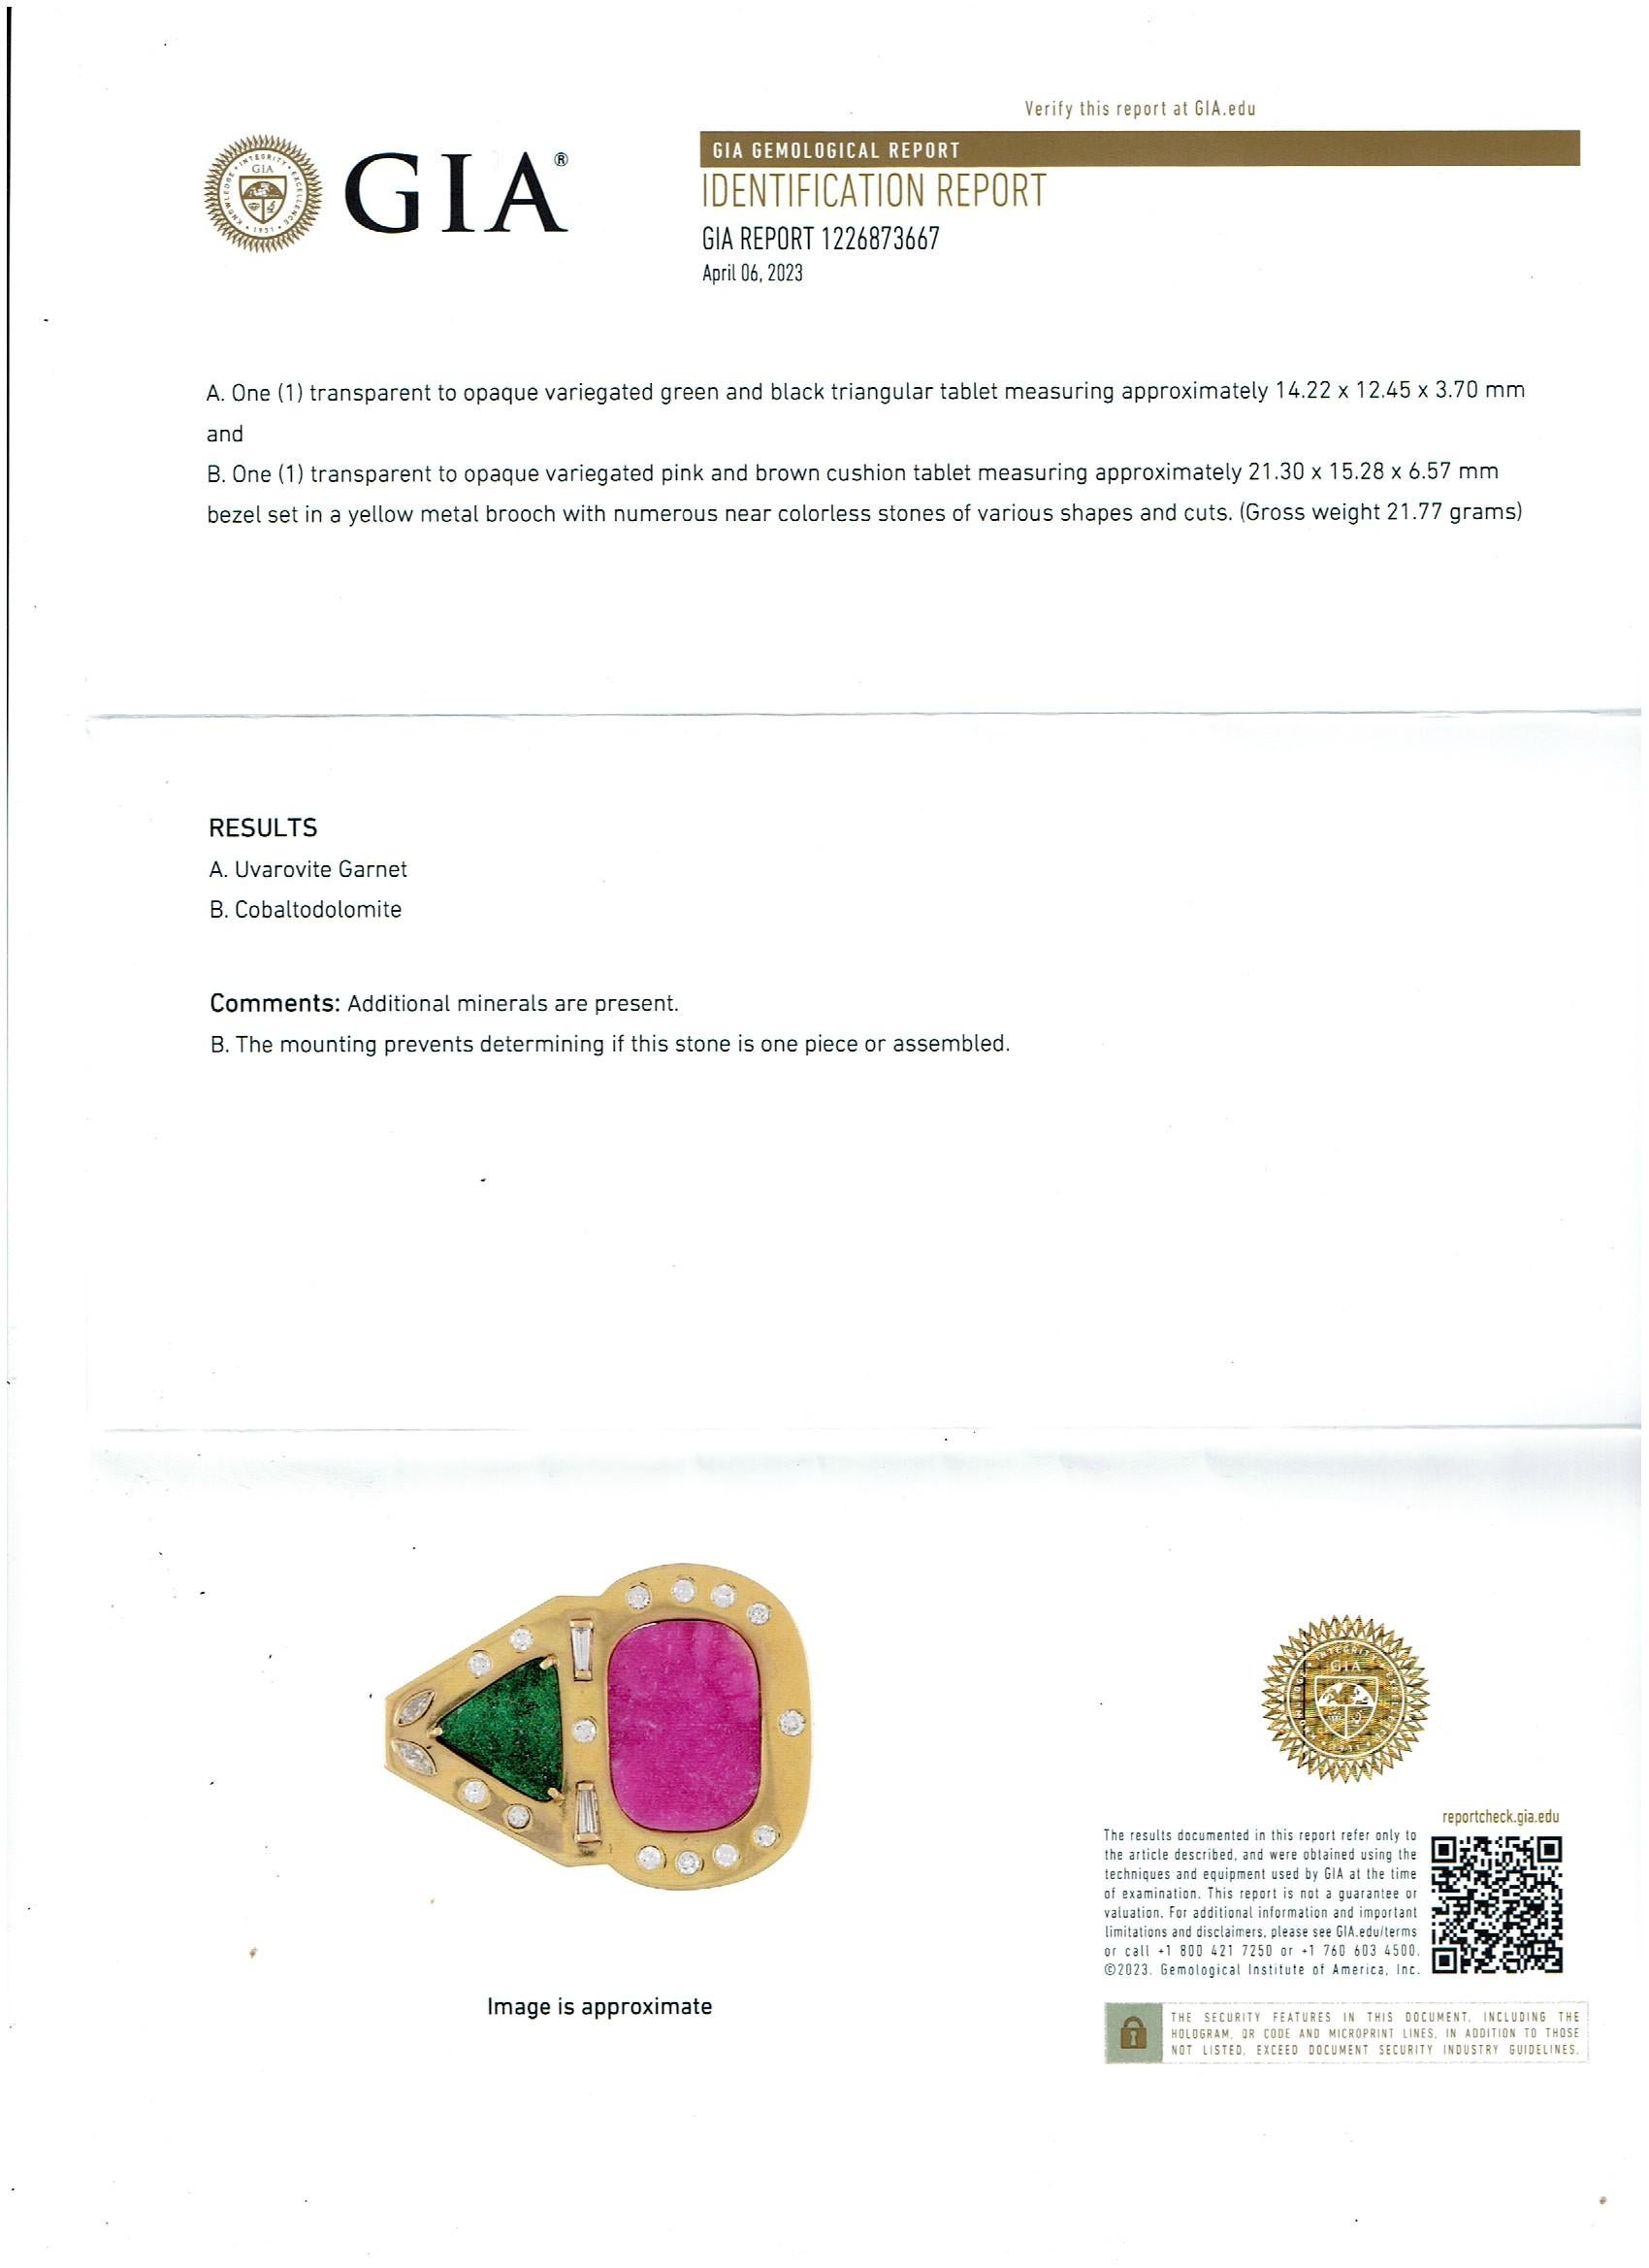 GIA Certified Uvarovite Garnet, Cobaltodolomite, Diamond & Akoya Pearl Necklace/ PIN
The center parts slides out to be used as pin also
For those in search of a truly exceptional piece of jewelry, look no further than this GIA Certified Uvarovite